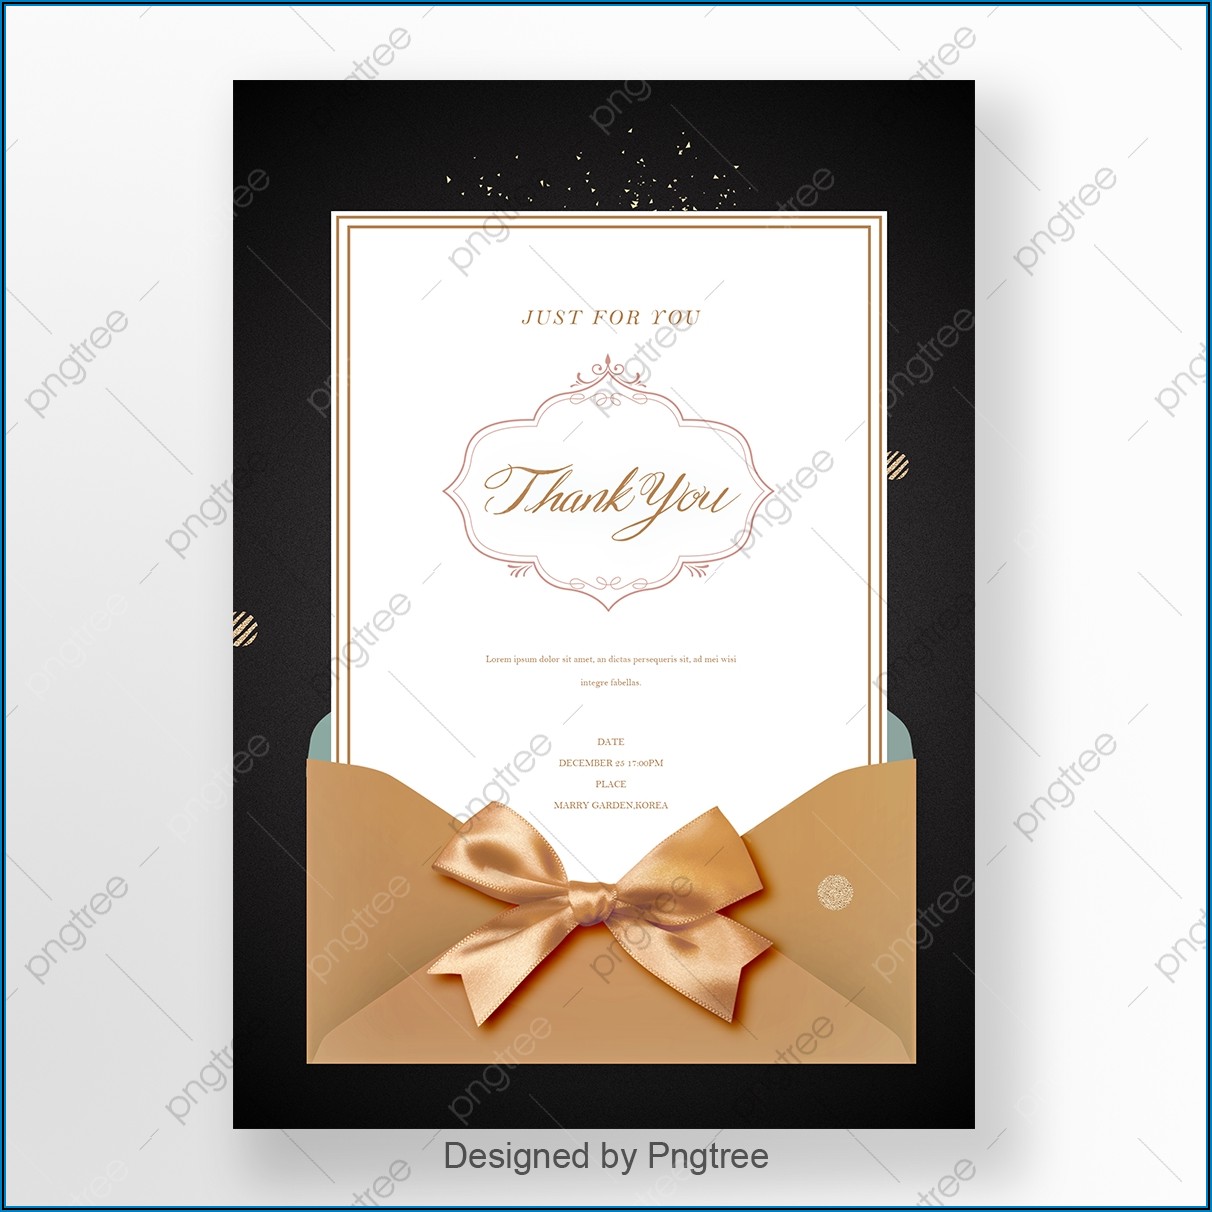 Free Templates For Business Invitation Card